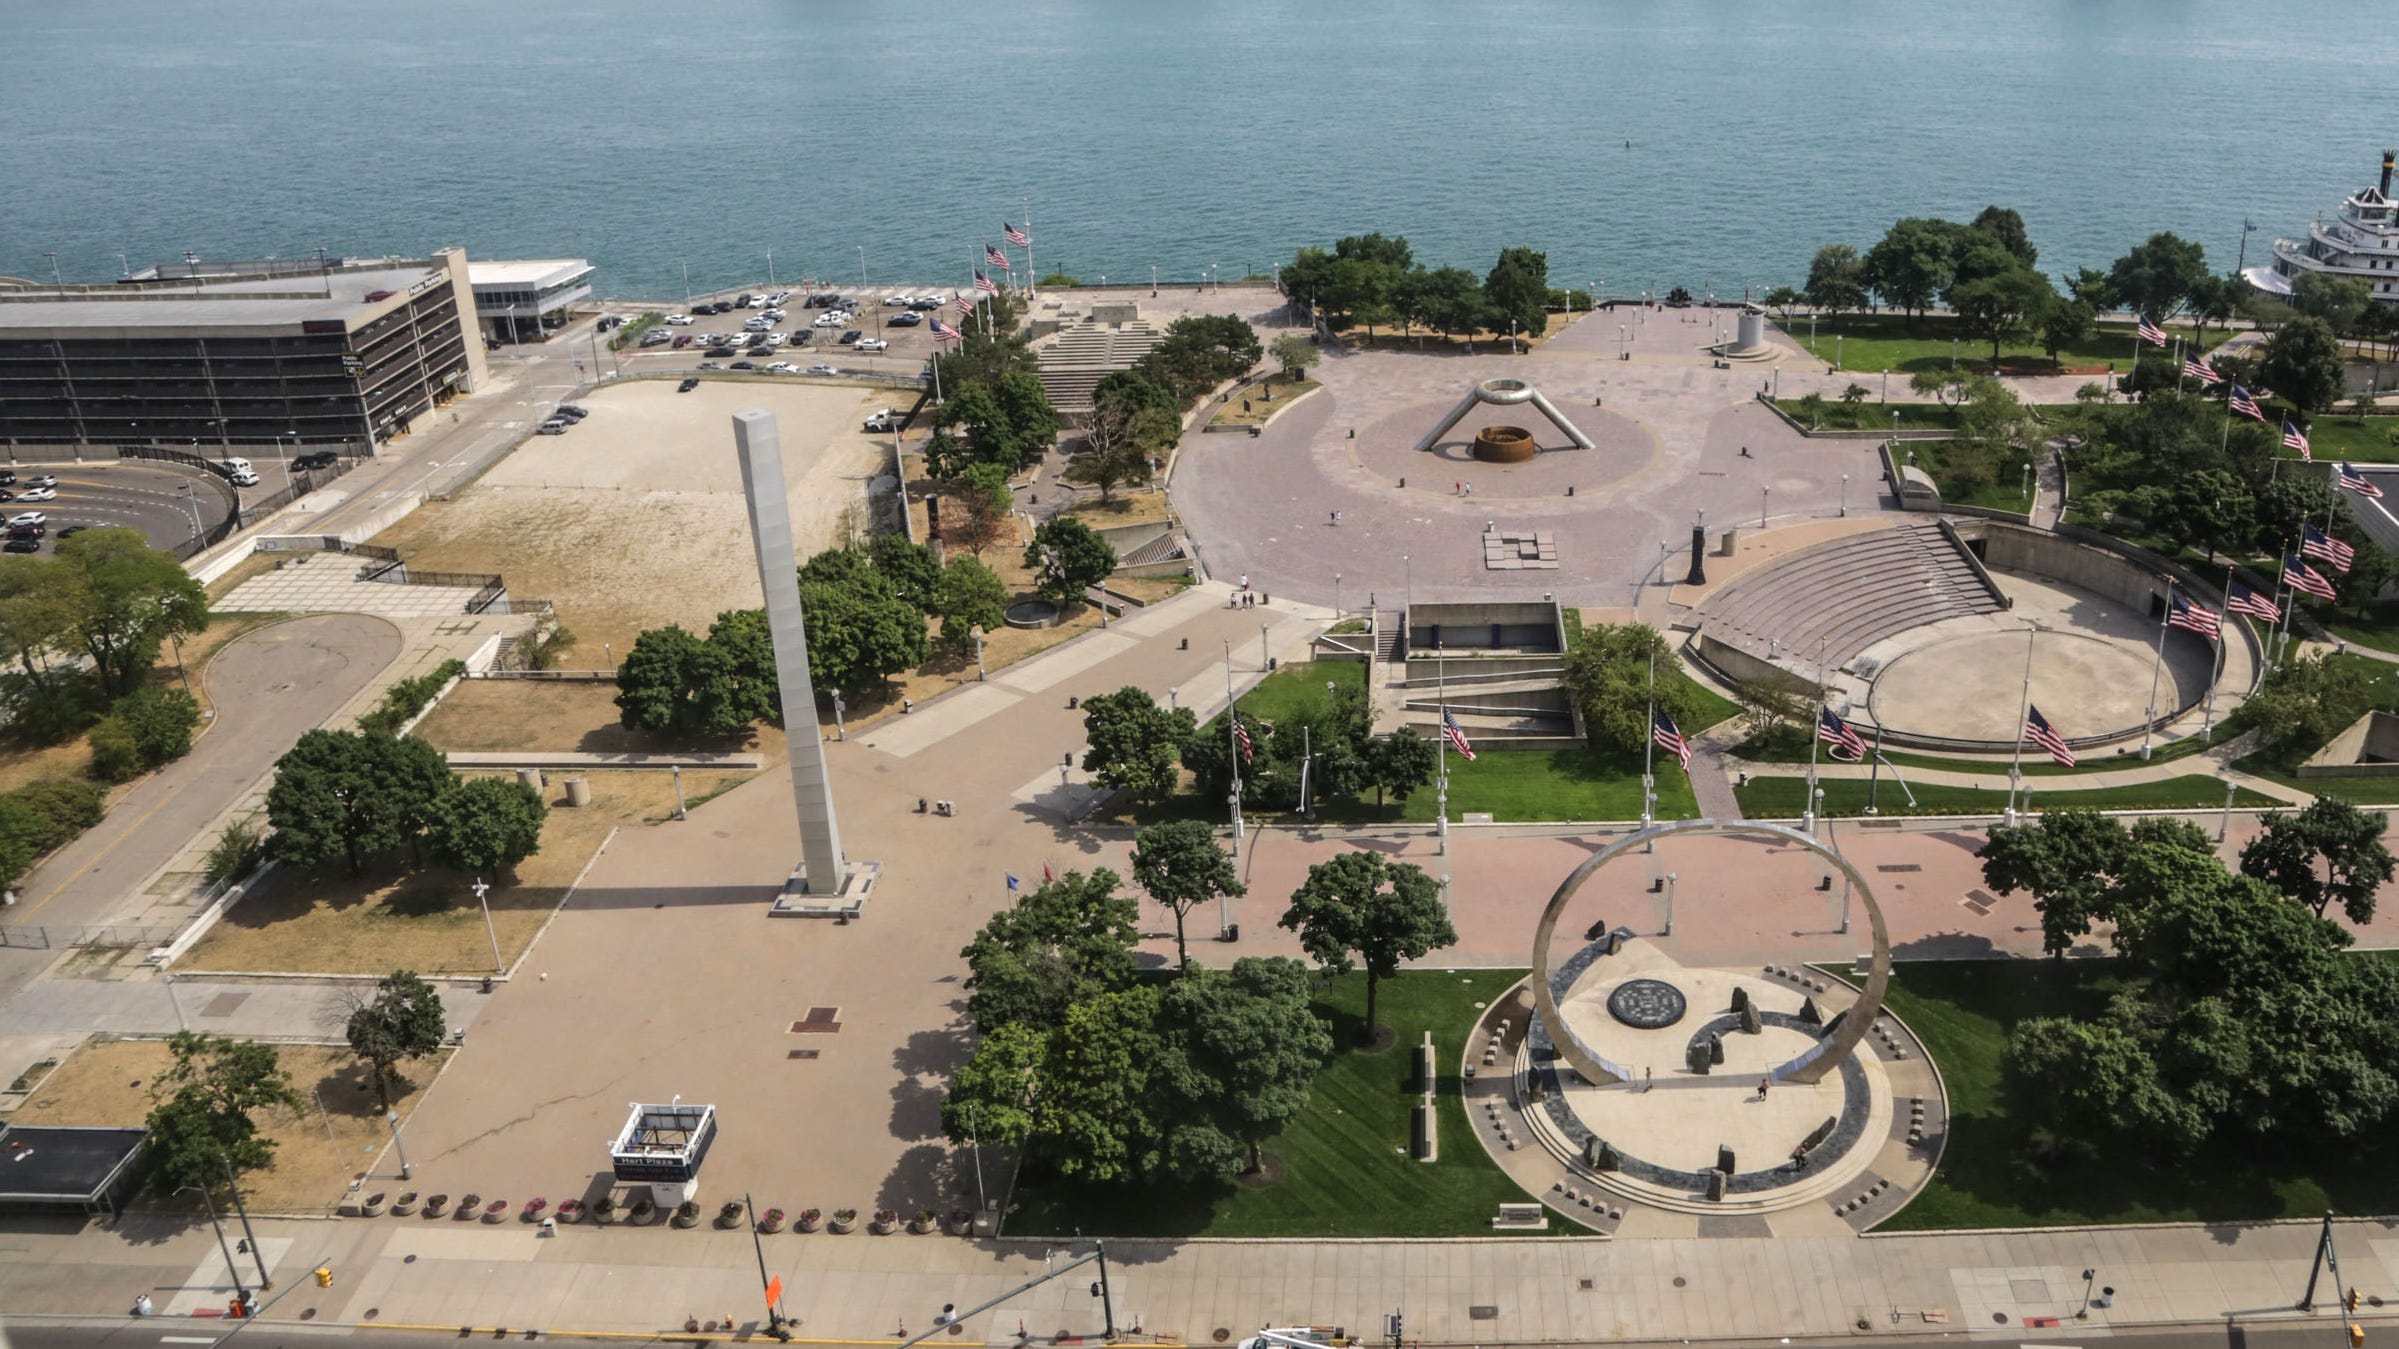 Is Hart Plaza next for a redo? Planners hope to liven it up